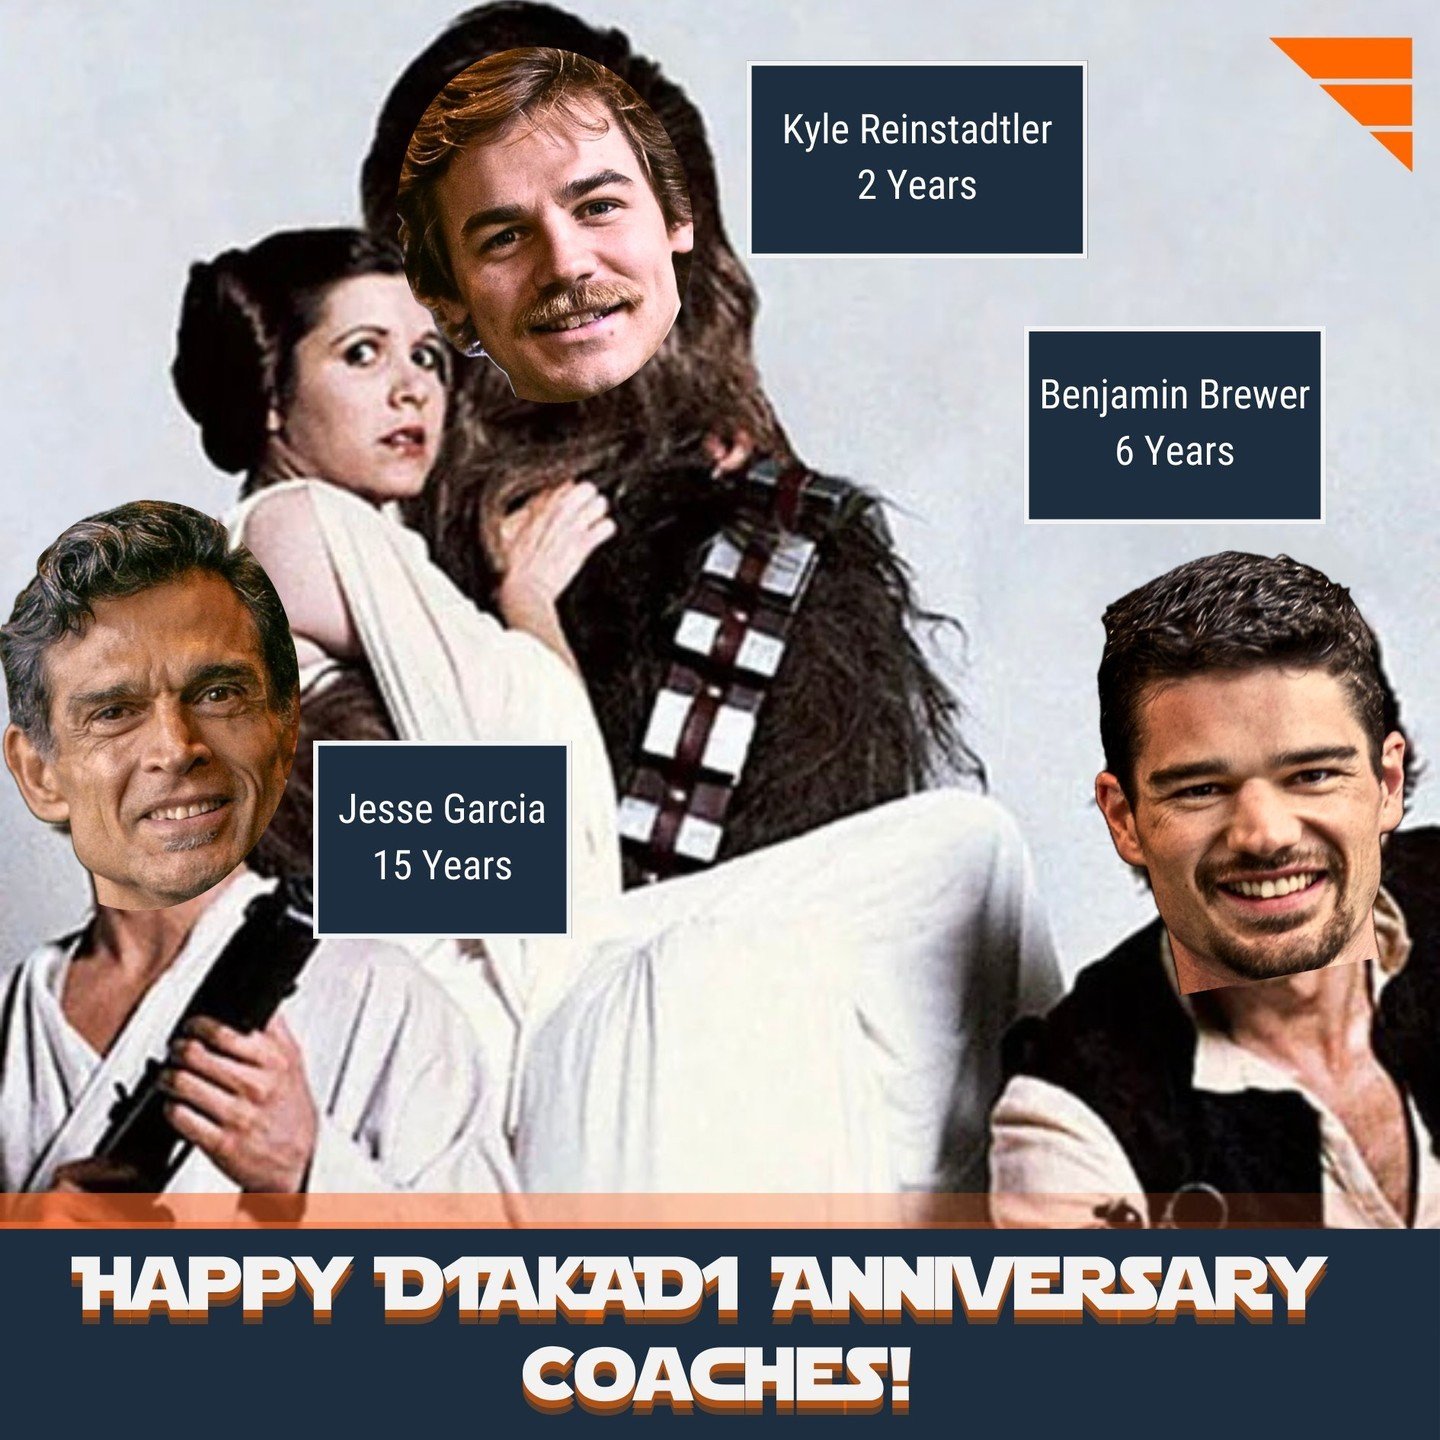 &lsquo;May the 4th&rsquo; be with our DIAKADI anniversary trainers this month! ⁠
⁠
Benjamin, Jesse, and Kyle, just like Han Solo, Chewbacca, and Luke Skywalker, you are some of our fearless leaders in the fitness rebellion. Here's to another year of 